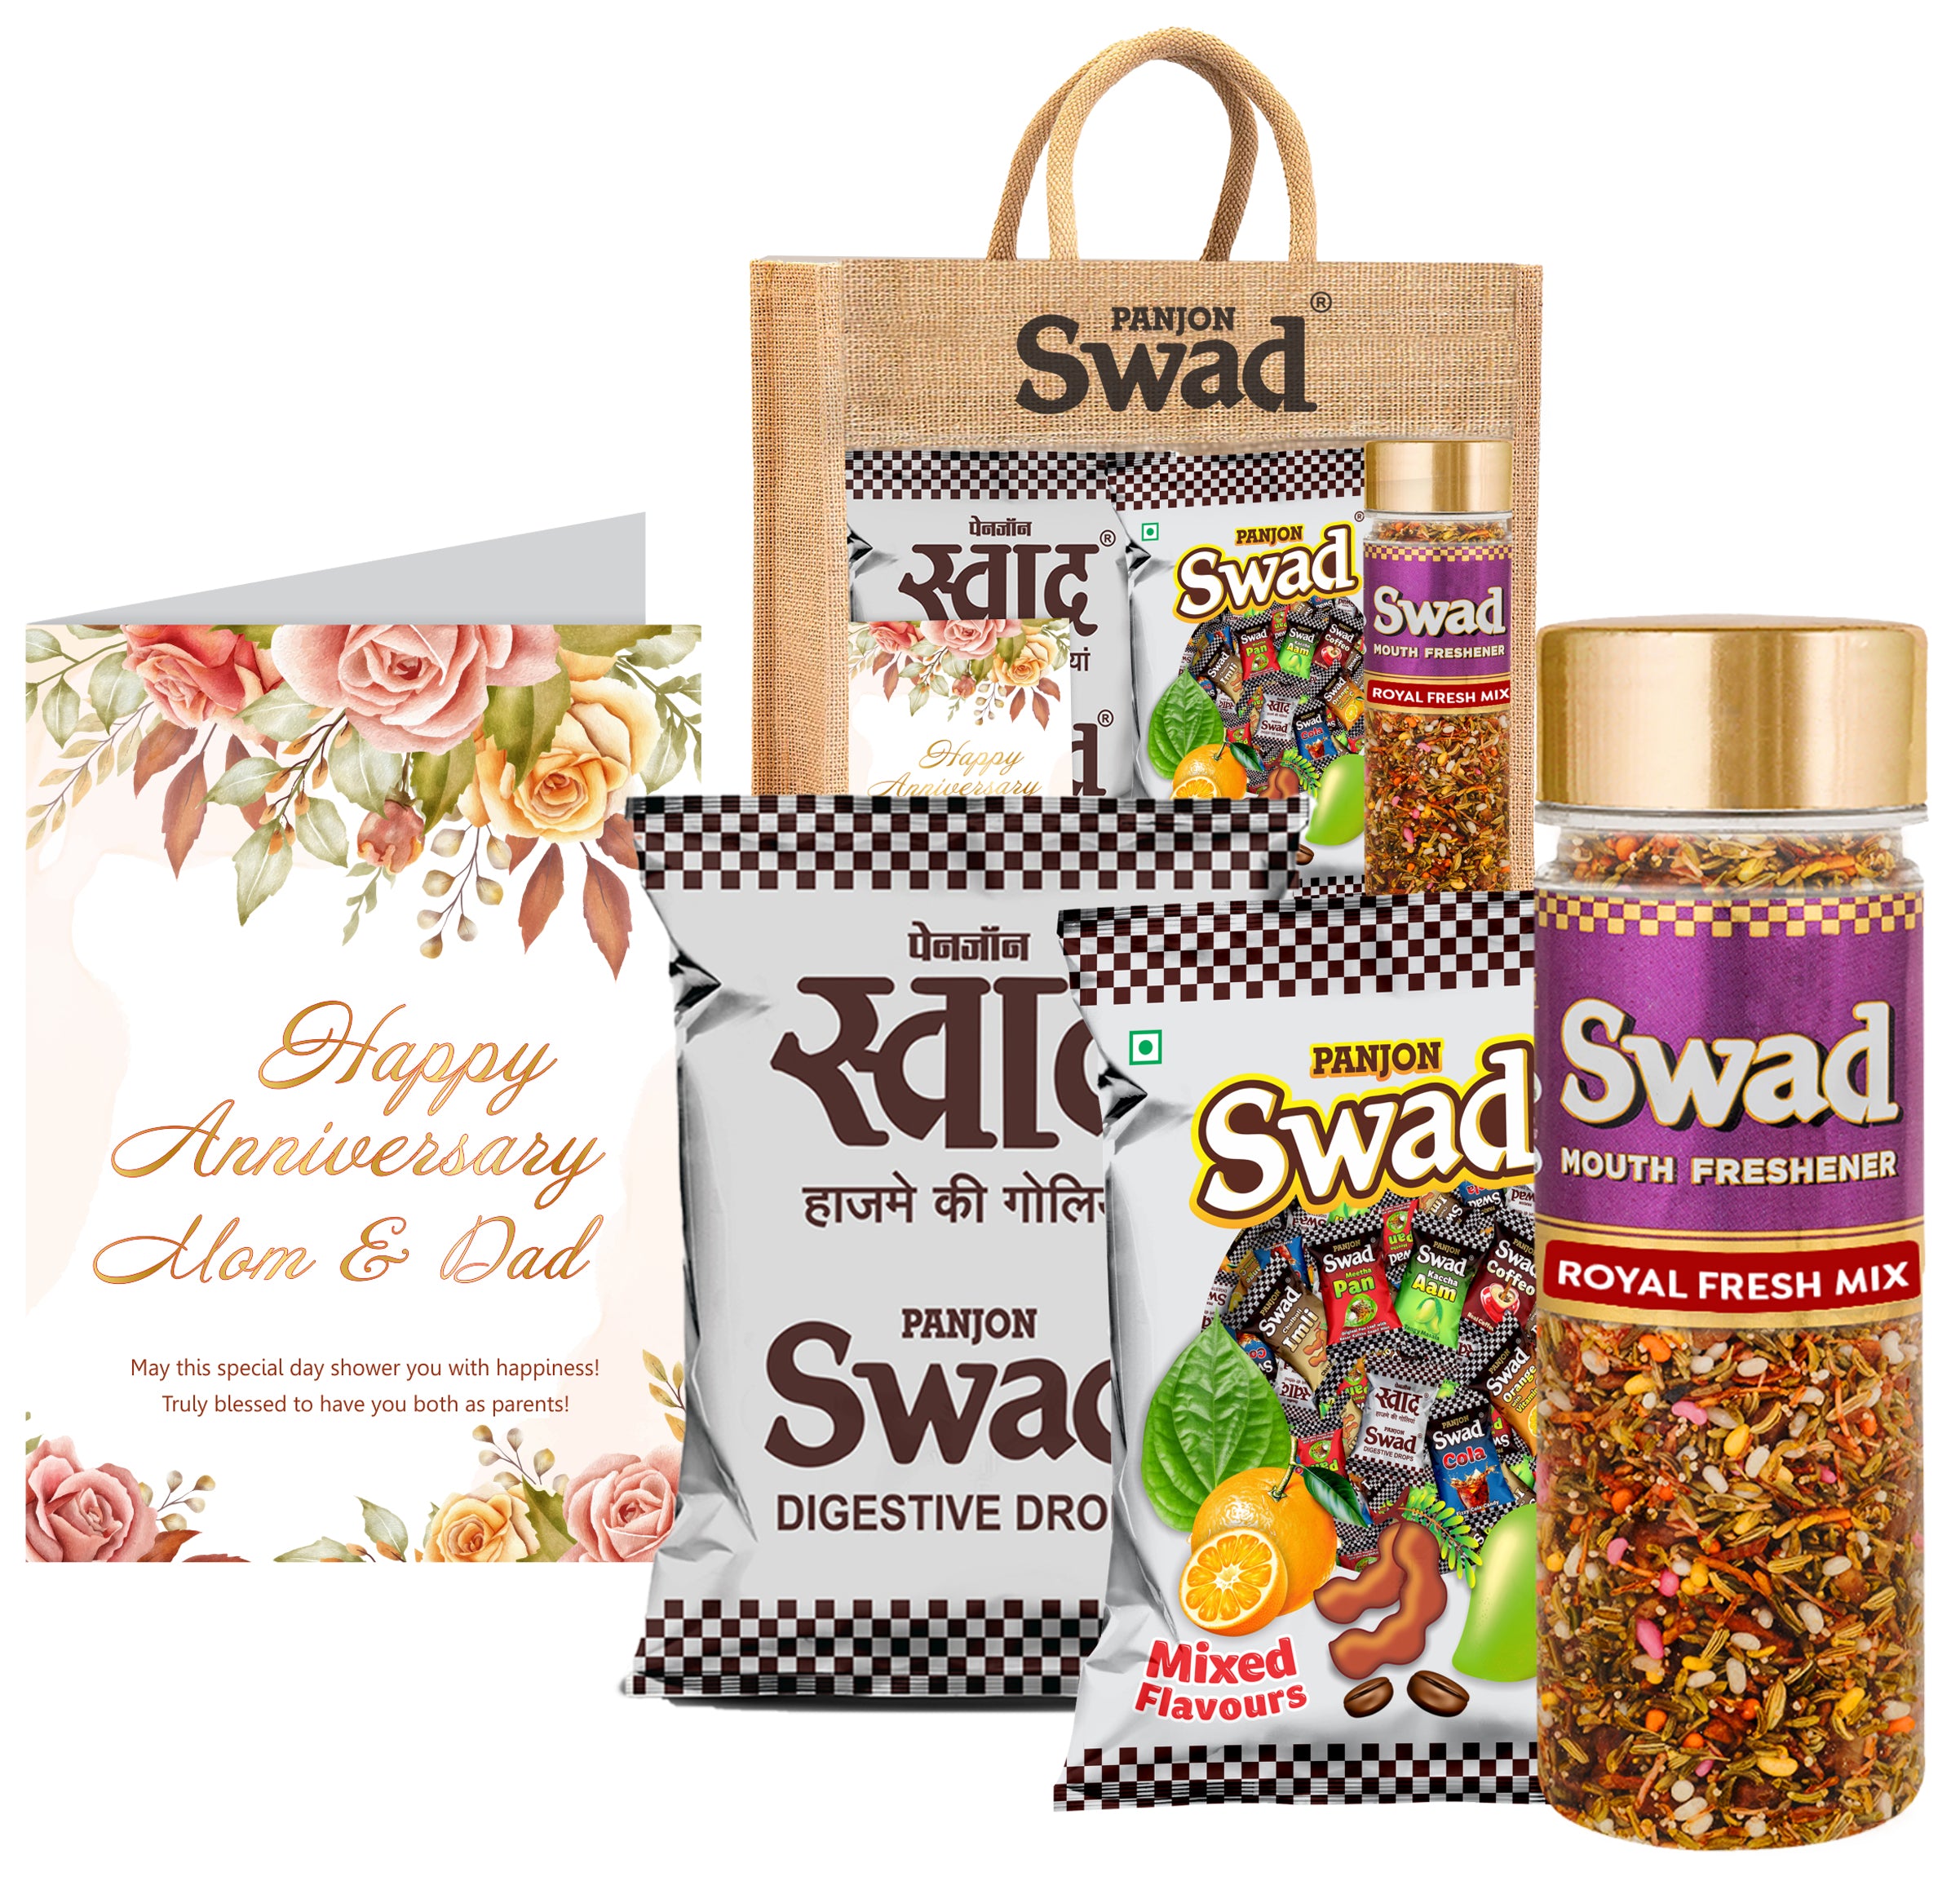 Swad Happy Anniversary Mom Dad Parents Gift with Card (25 Swad Candy, 25 Mixed Toffee, Royal Fresh Mix Mukhwas) in Jute Bag